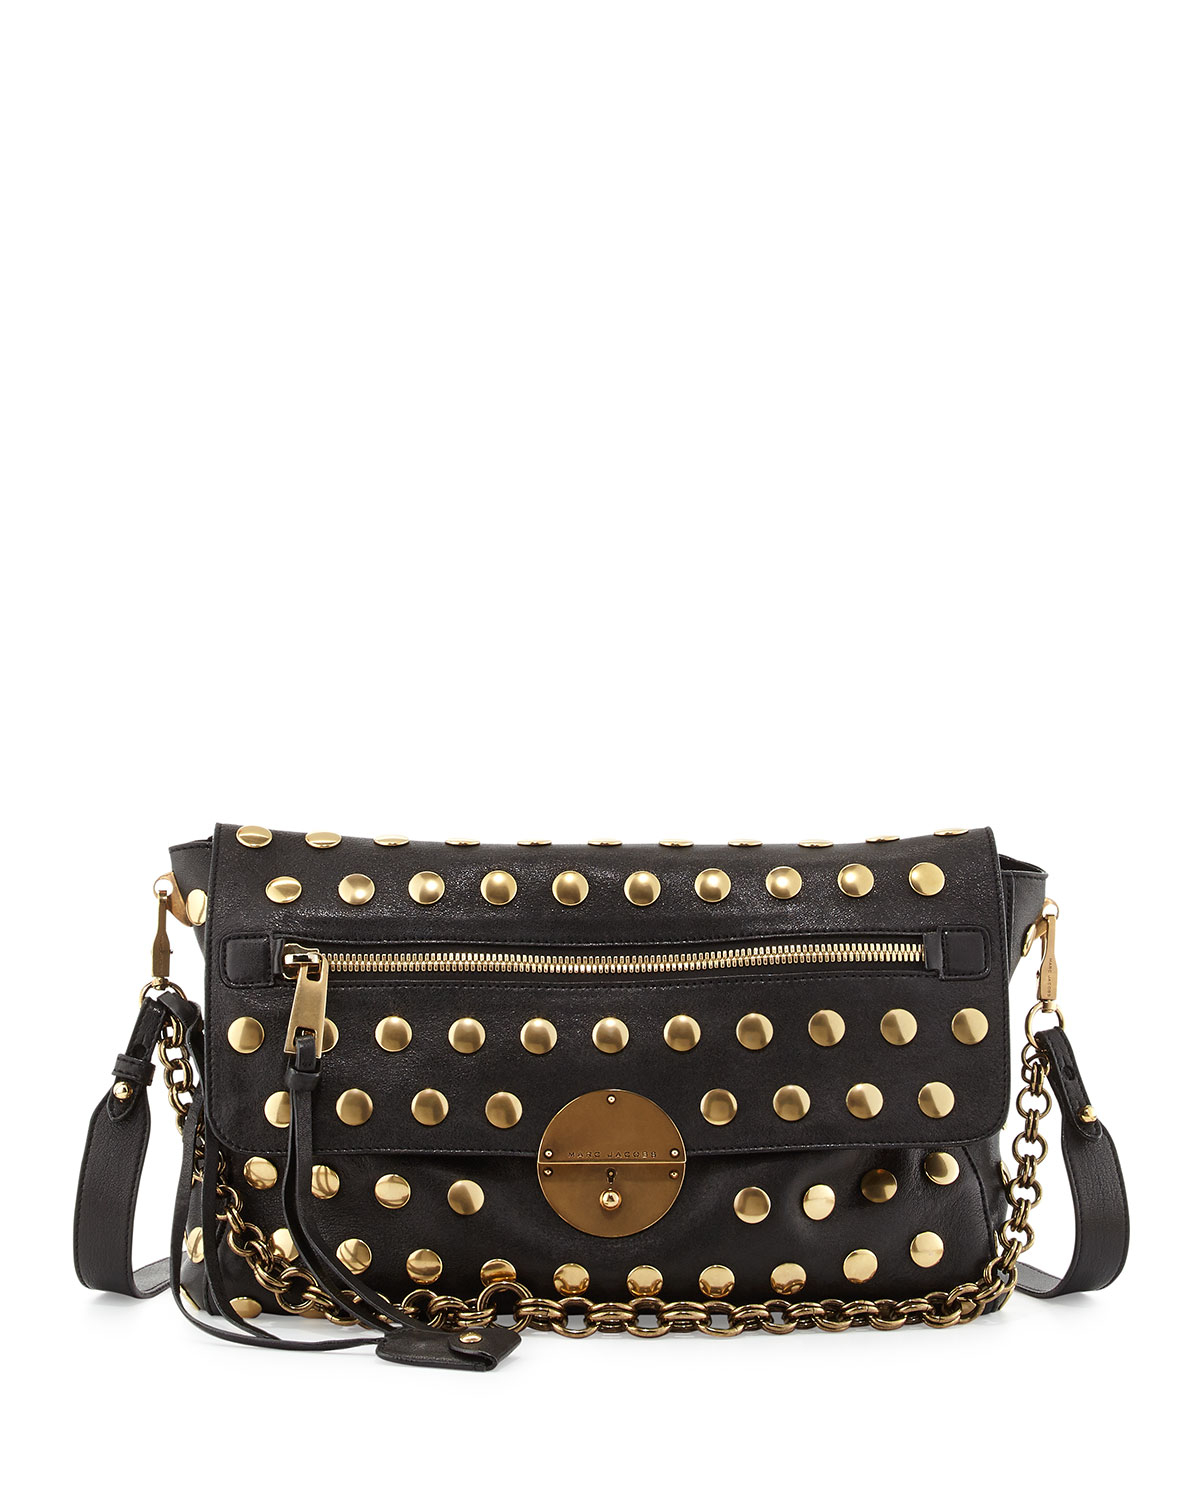 Marc Jacobs Nomad Chain-Strap Hobo Bag in Black | Lyst